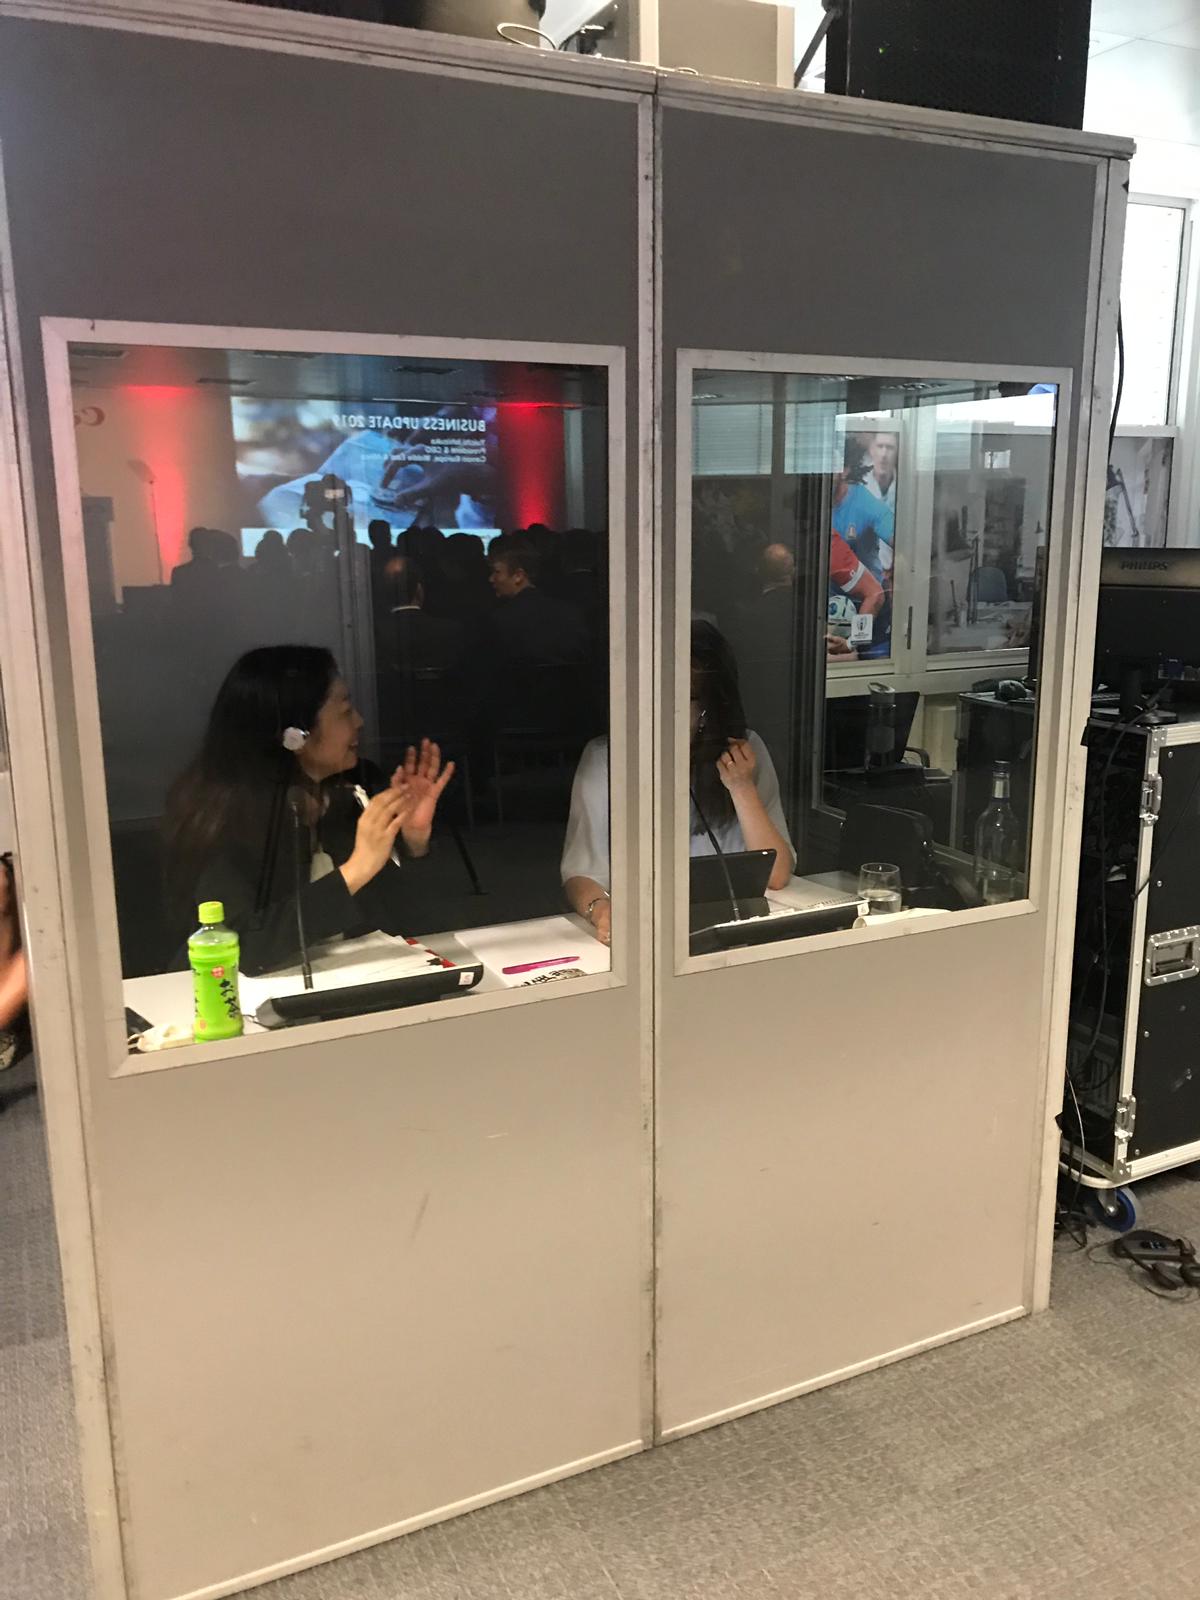 Interpreters in soundproof booth, interpreting for a business meeting